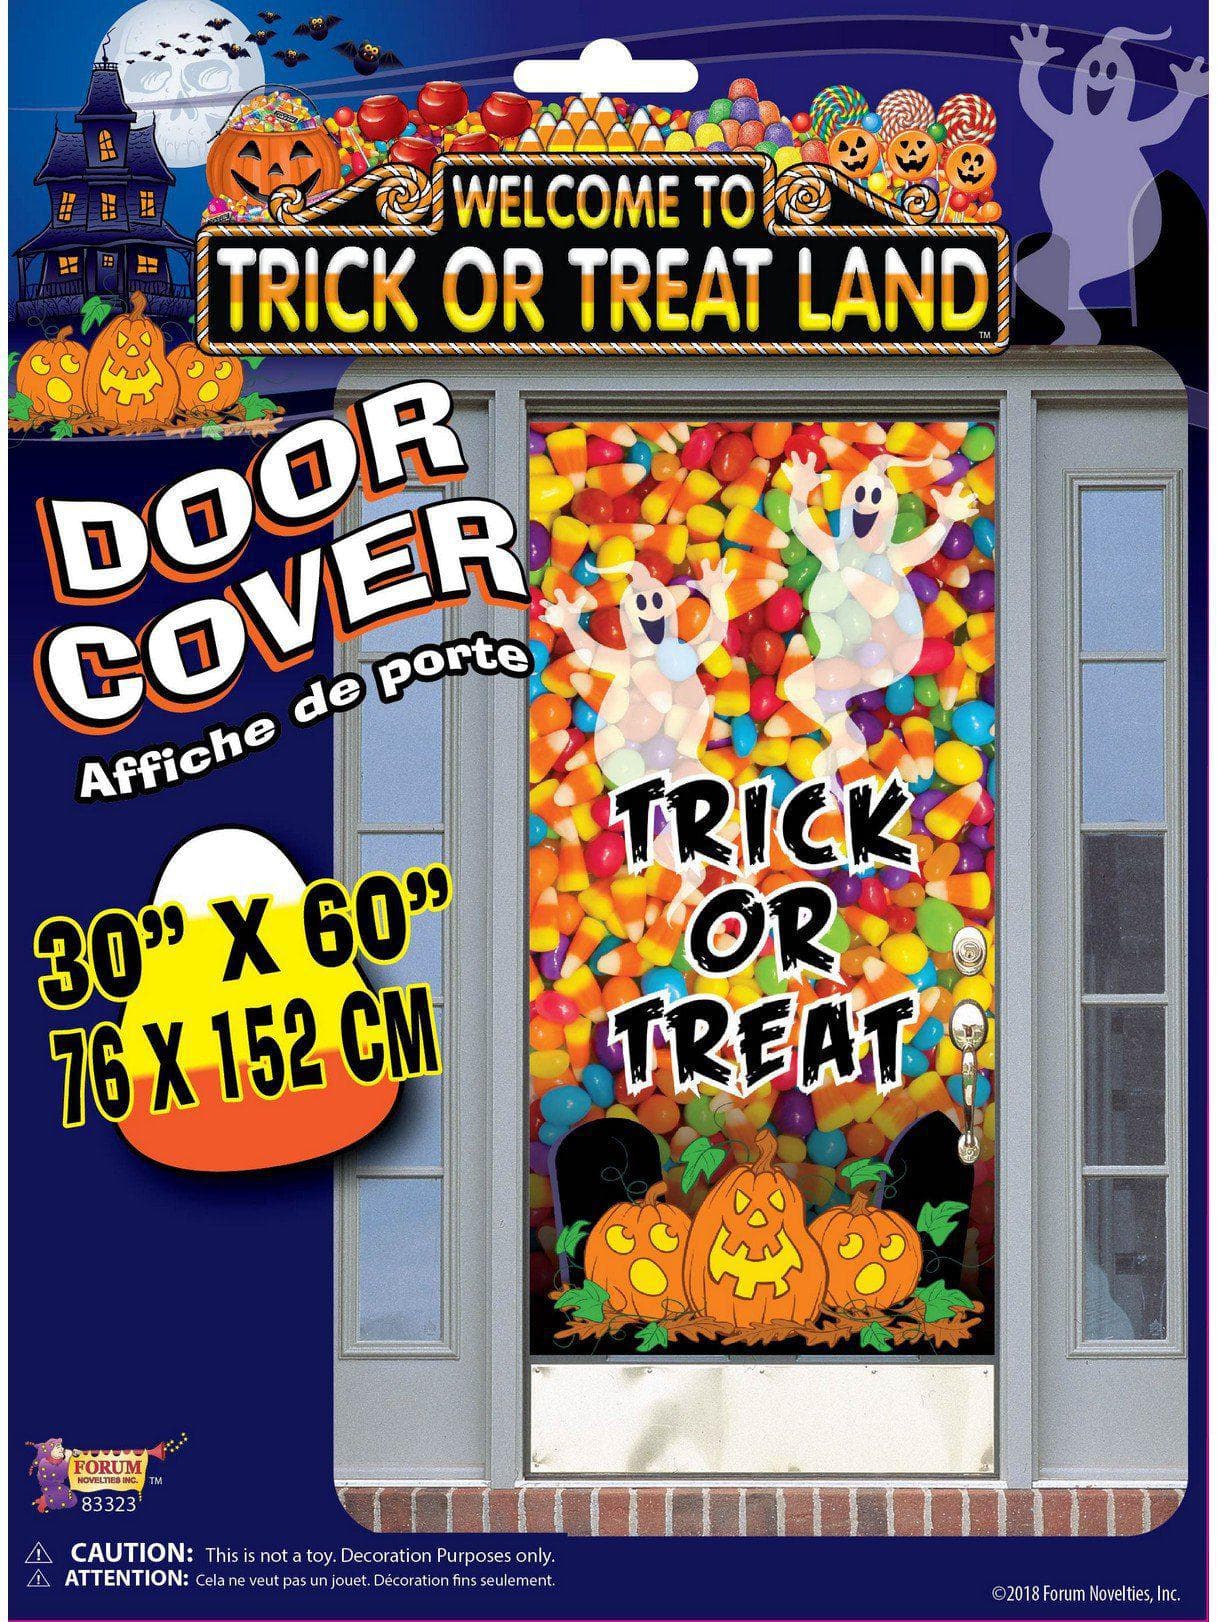 Trick or Treat Candy Door Cover Decoration - costumes.com